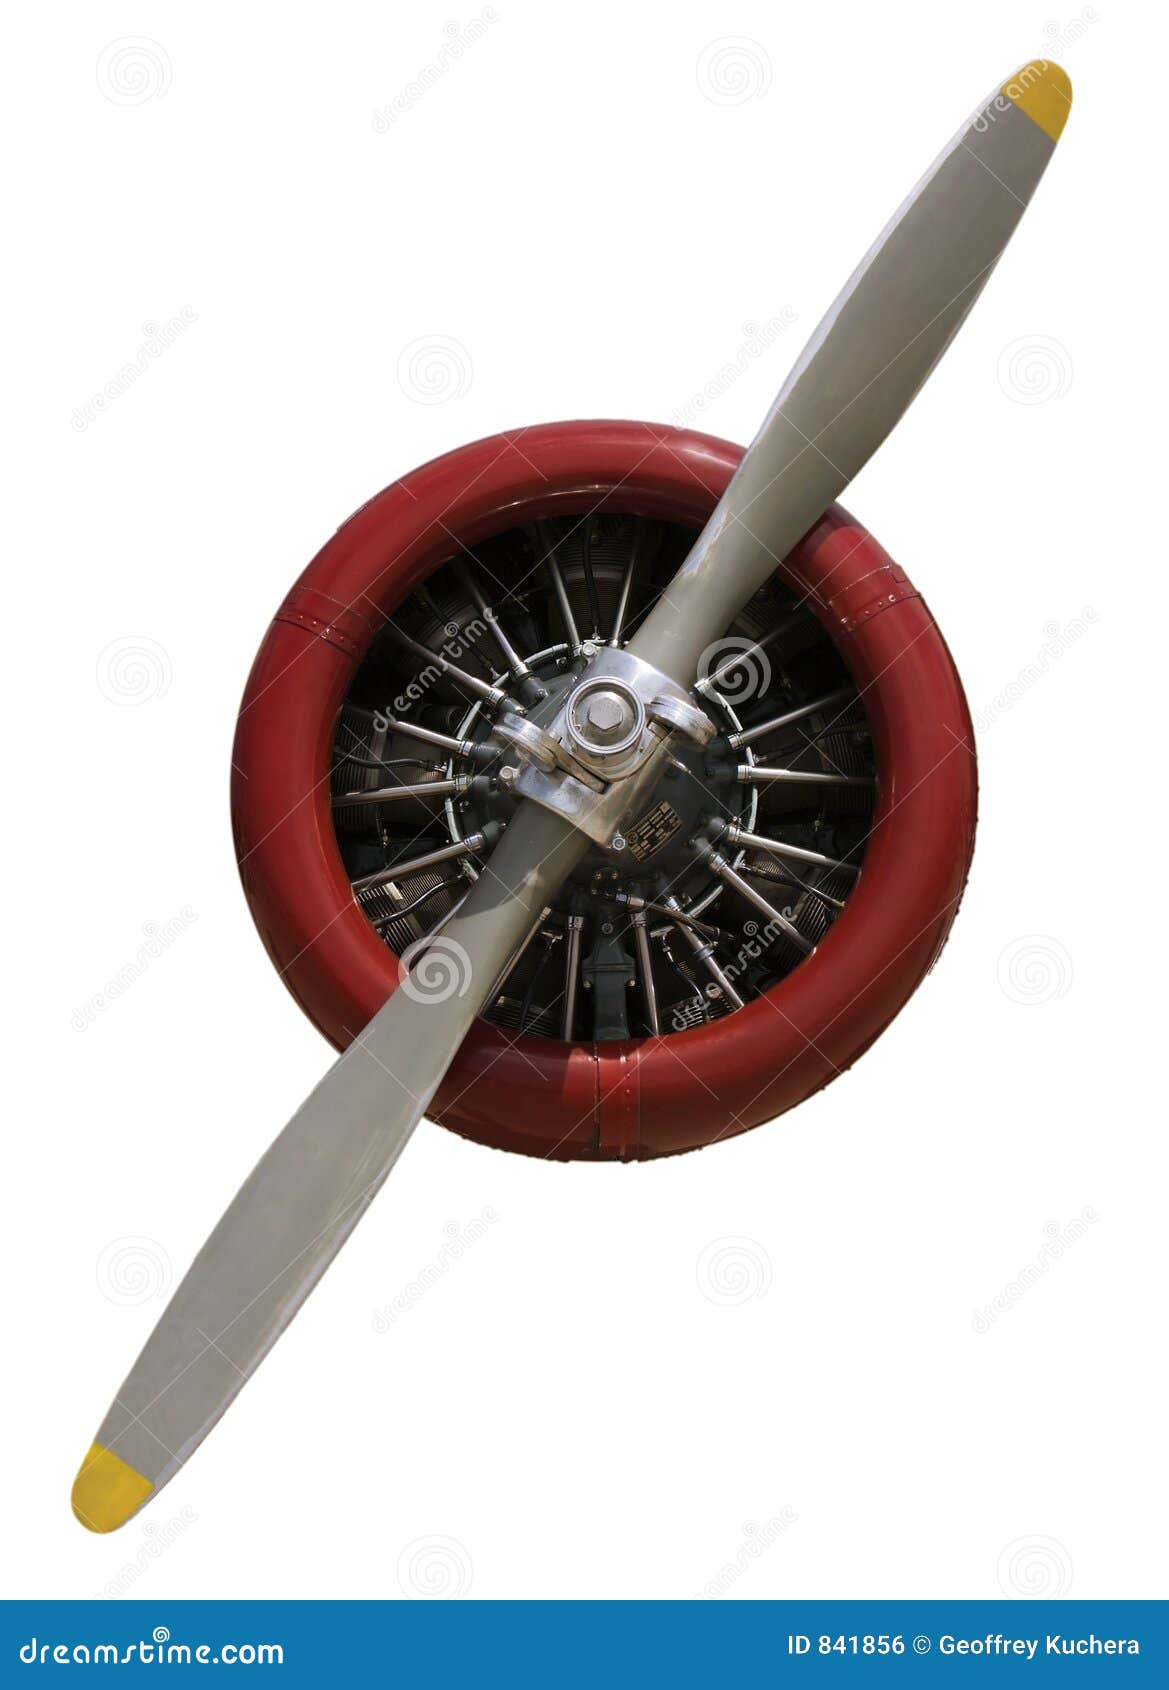 at-6 texan engine and propeller